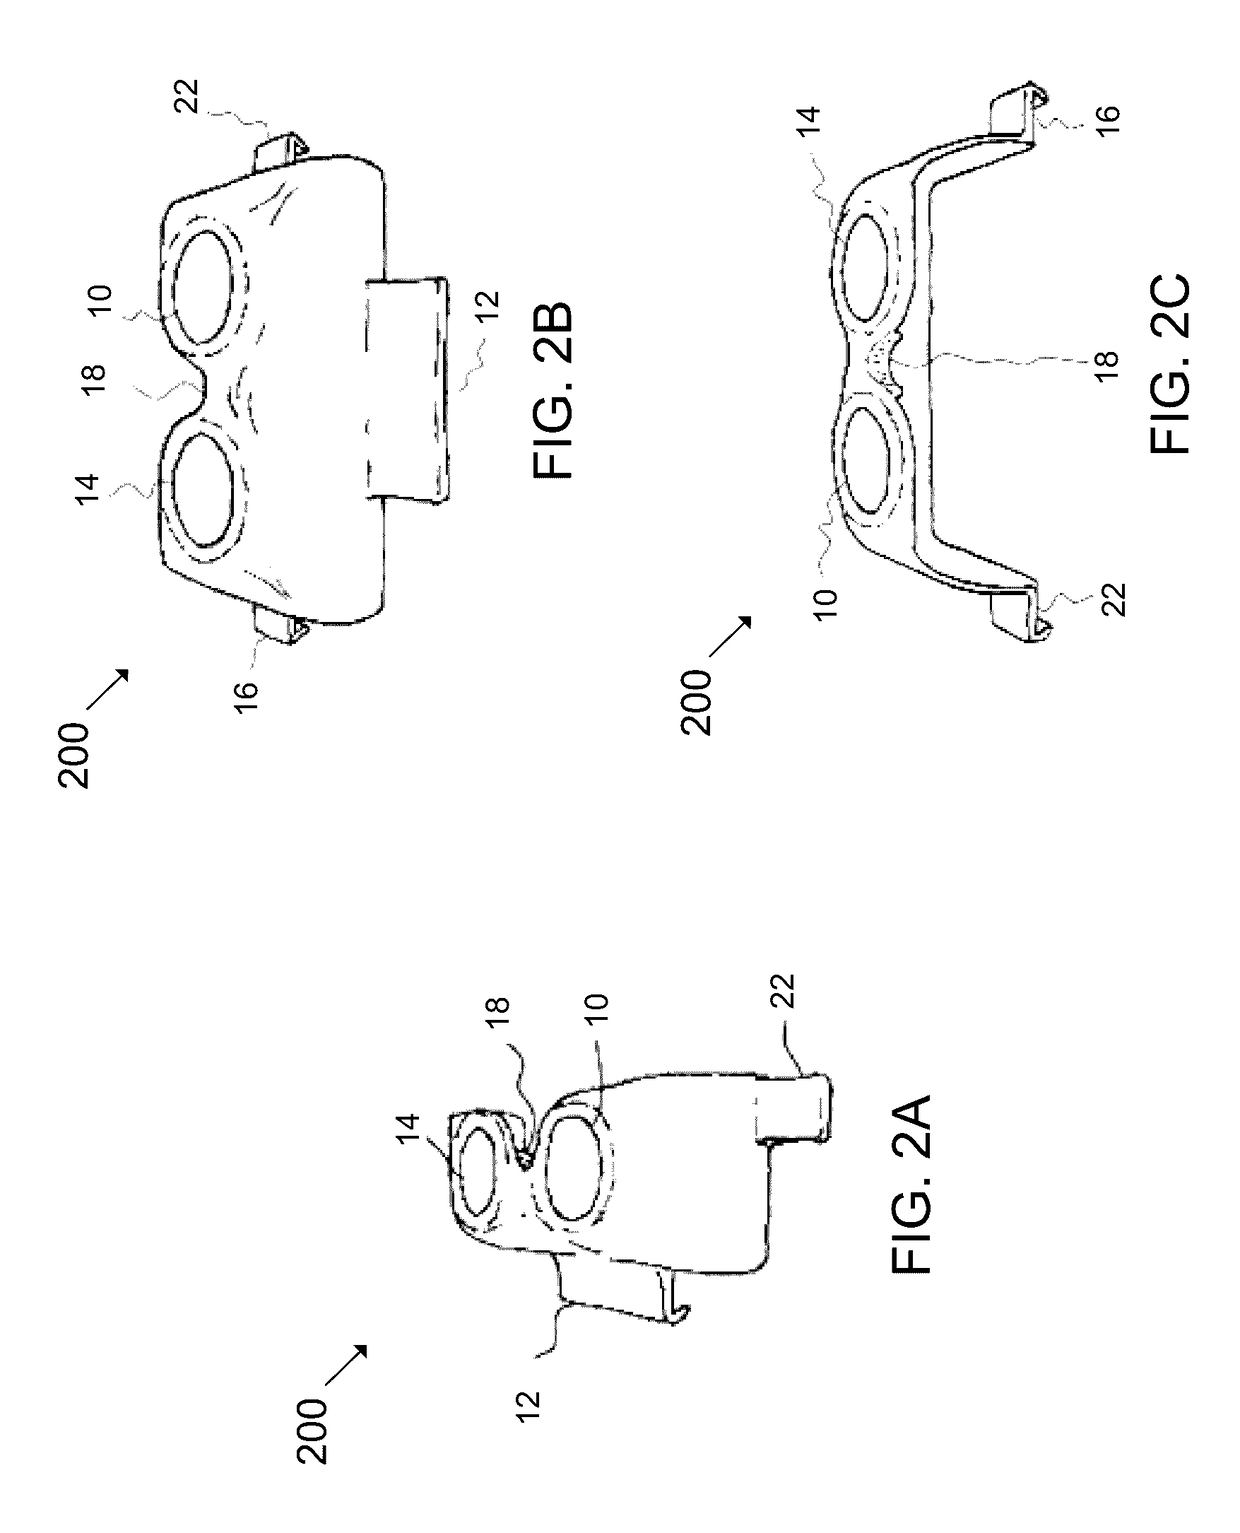 Method for interacting with virtual environment using stereoscope attached to computing device and modifying view of virtual environment based on user input in order to be displayed on portion of display